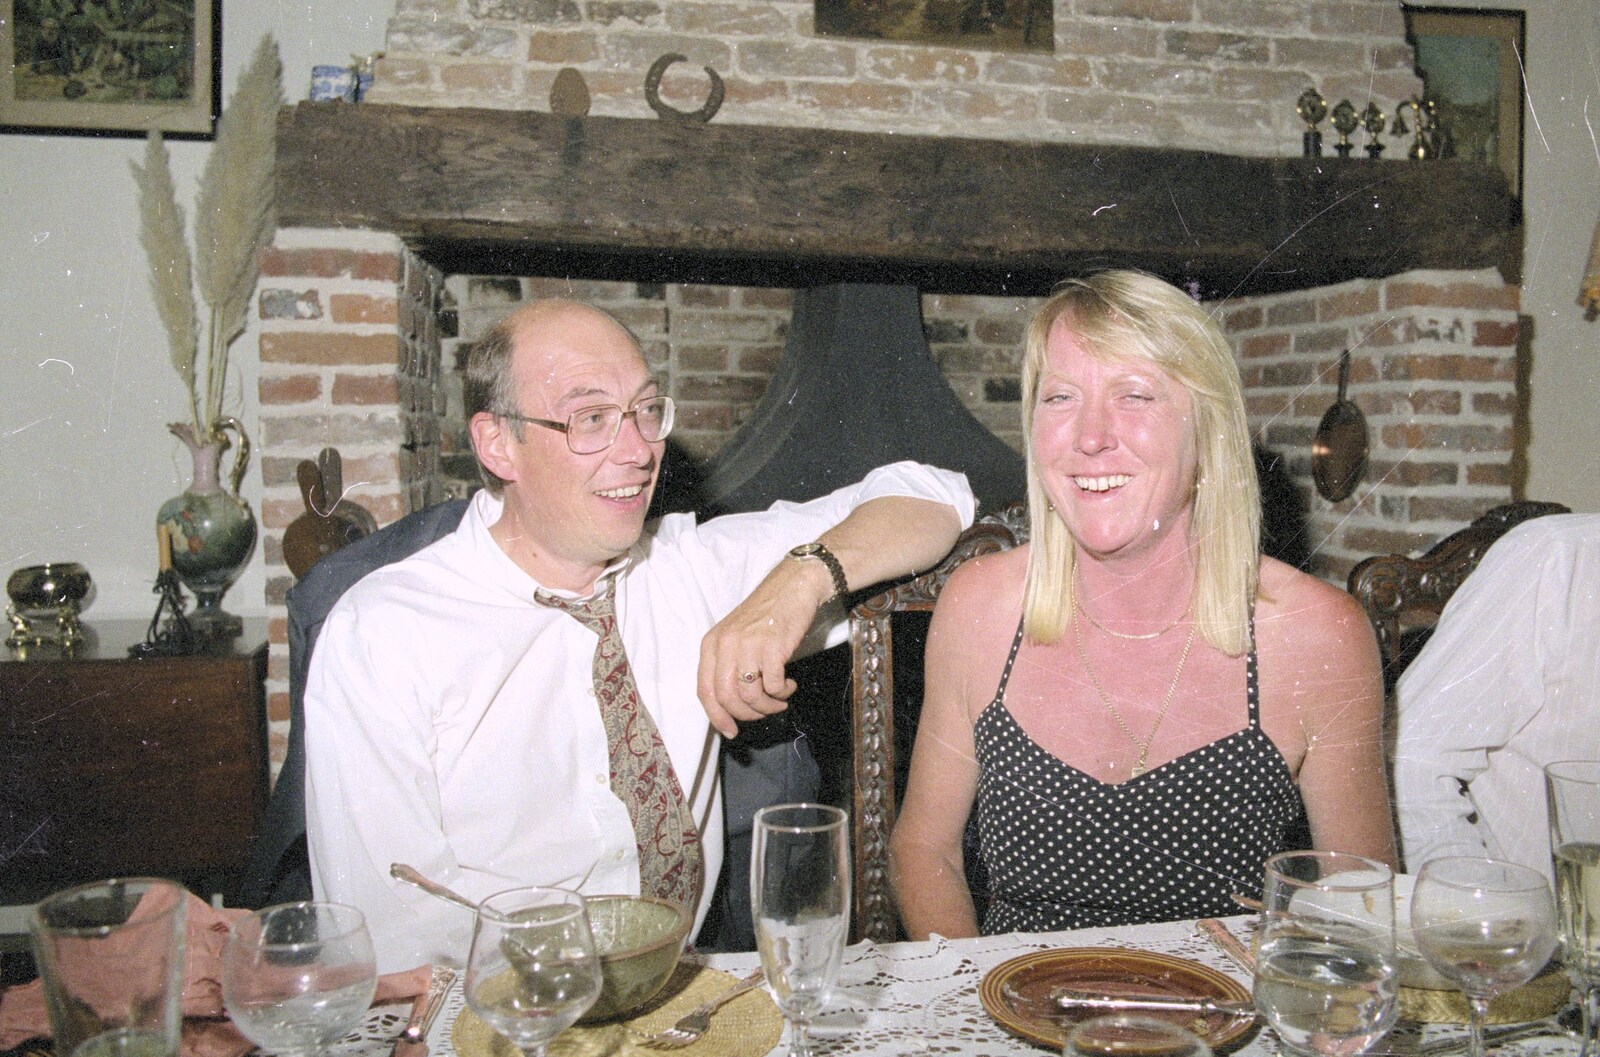 Kipper and Sue from Nosher's Dinner Party, Stuston, Suffolk - 14th September 1991